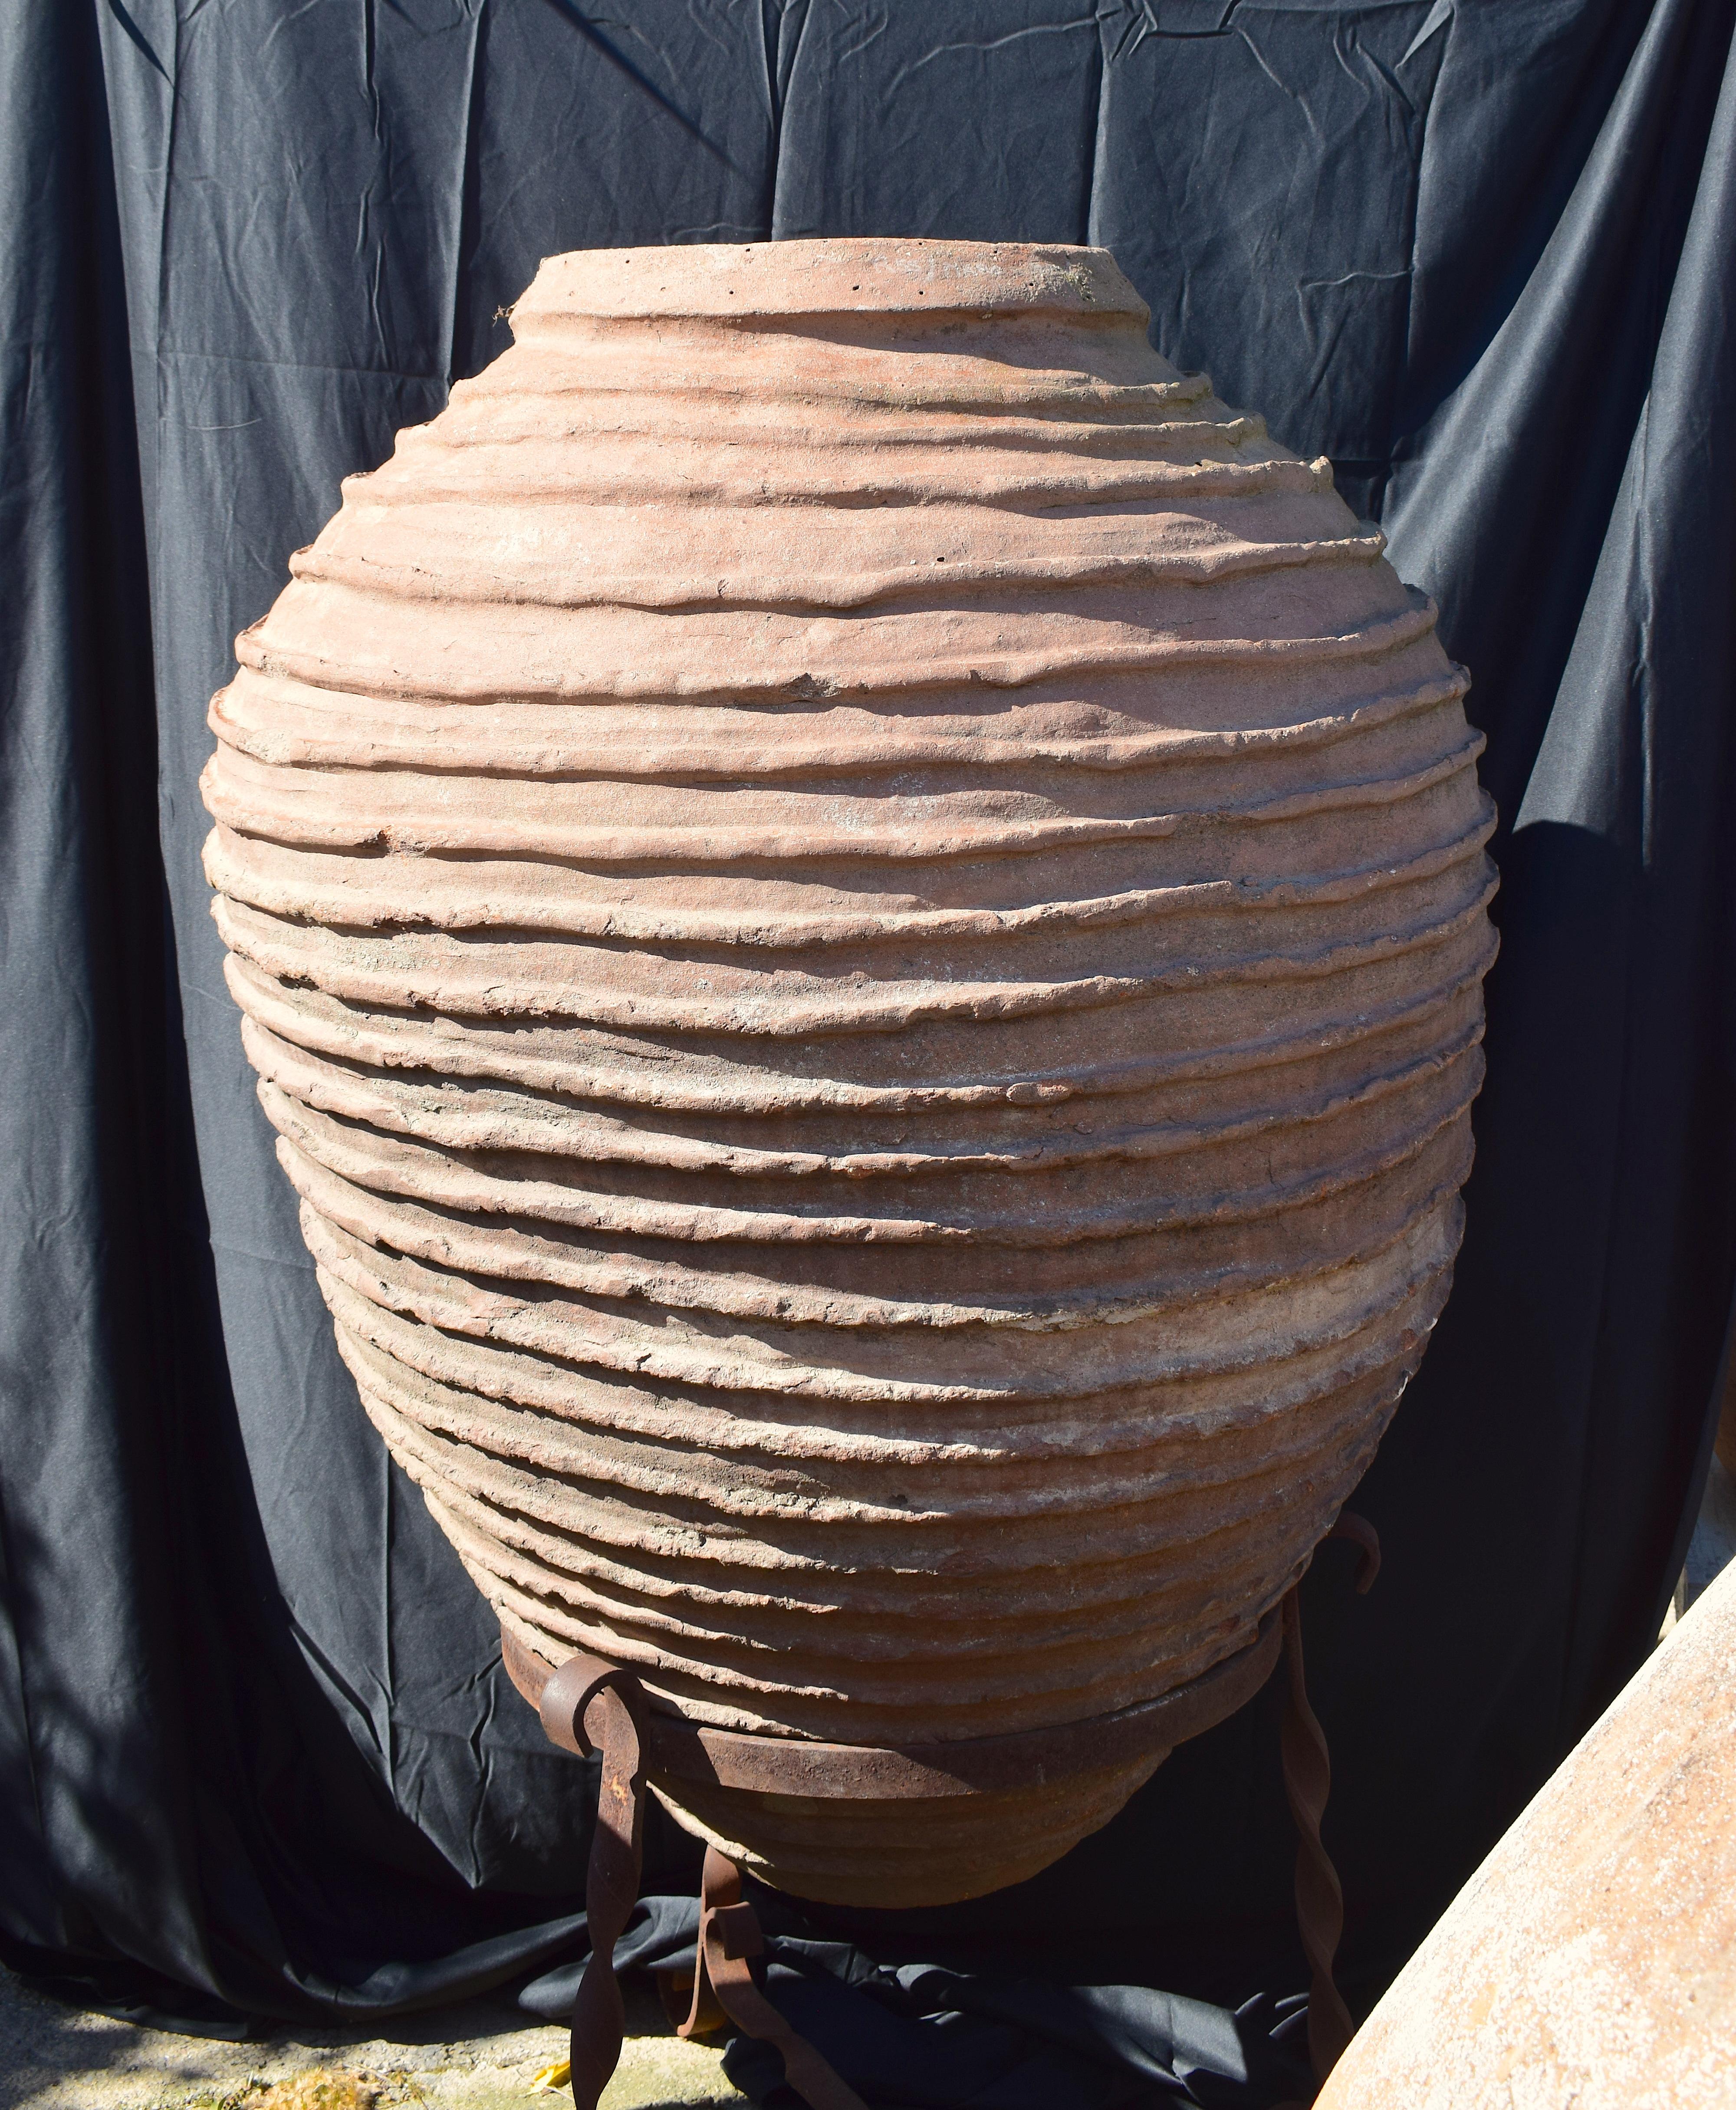 An antique Spanish large terracotta vessel from the late 19th century. This bulb-shaped vessel has thick round lips at the top opening followed by ribbed trimming around the perimeter of the exterior of the vessel. The base has a slight curve shape.